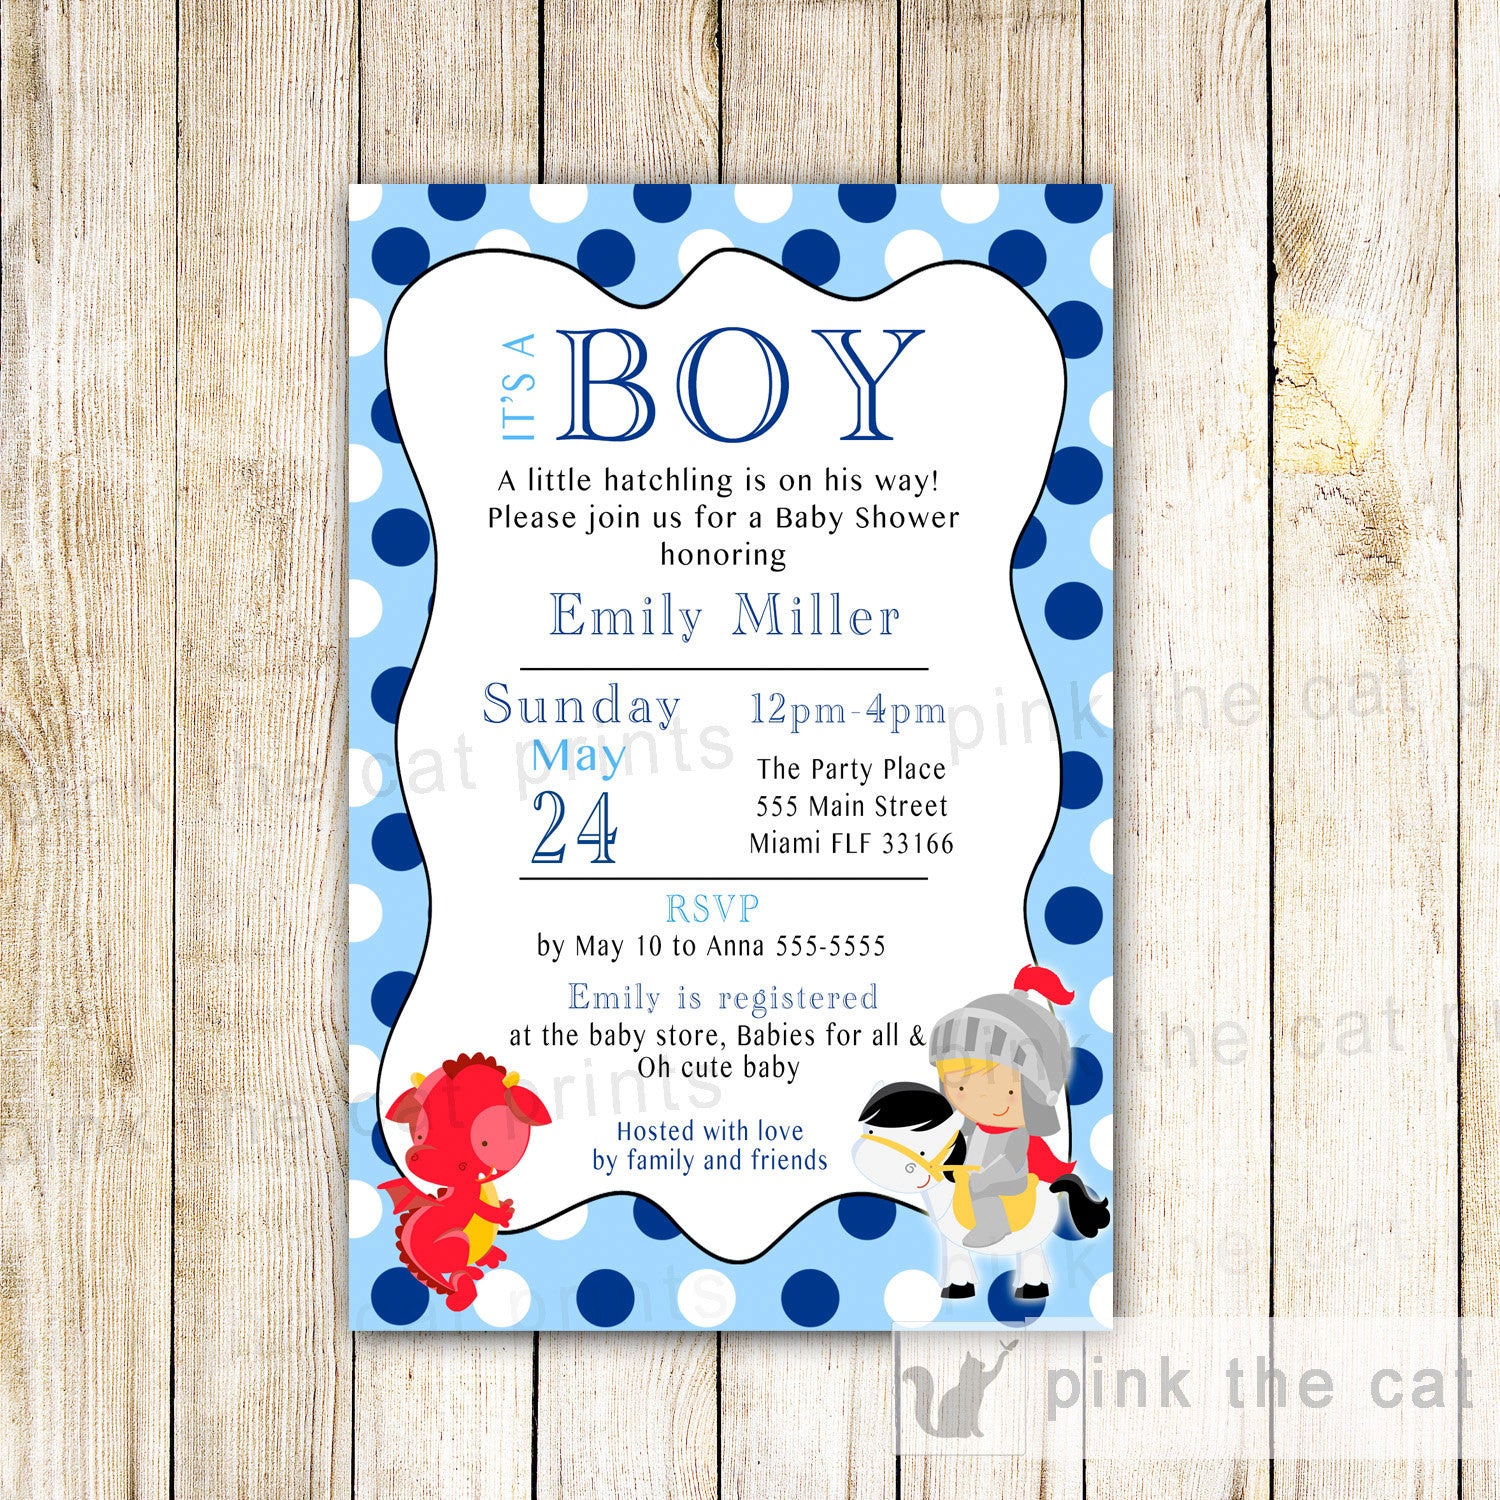 Dragon Knight Invitation Baby Boy Shower Red Blue – Pink the Cat